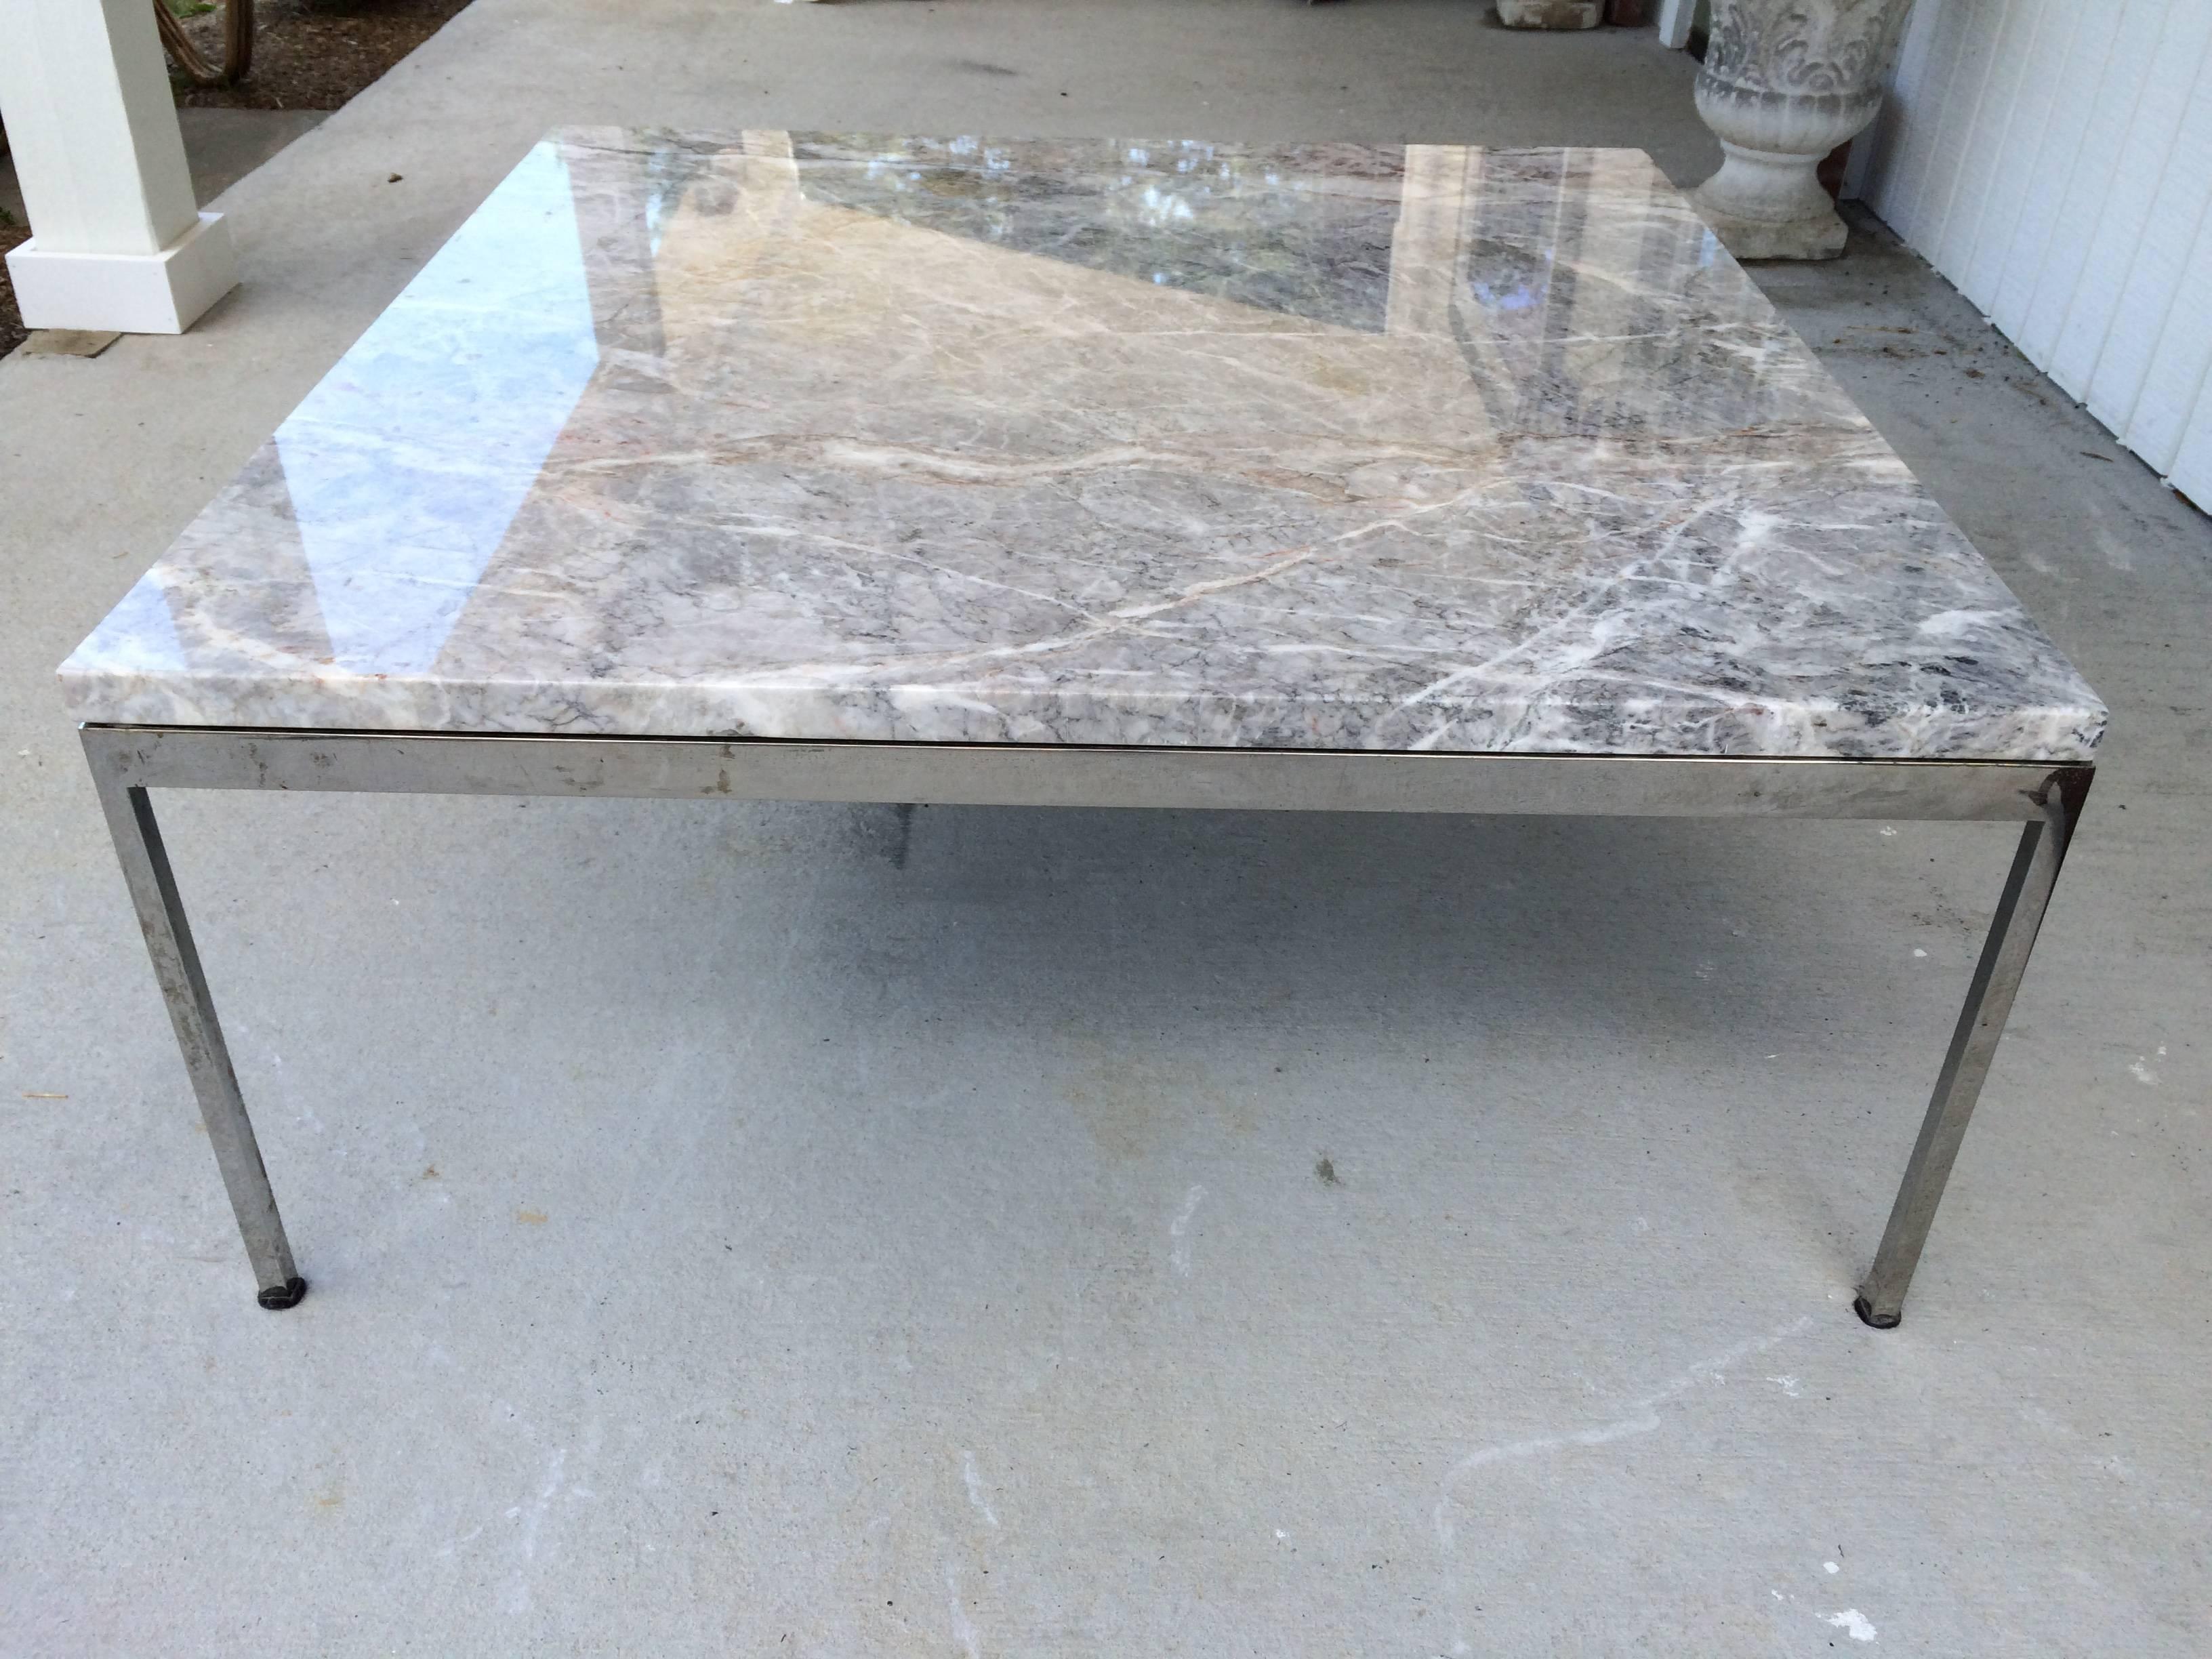 Sleek chrome and marble coffee table. This elegant table will go with any style decor from Minimalist to Hollywood glamour to Mid-Century Modern. Timeless. No pitting to chrome. Just reflections on ground.